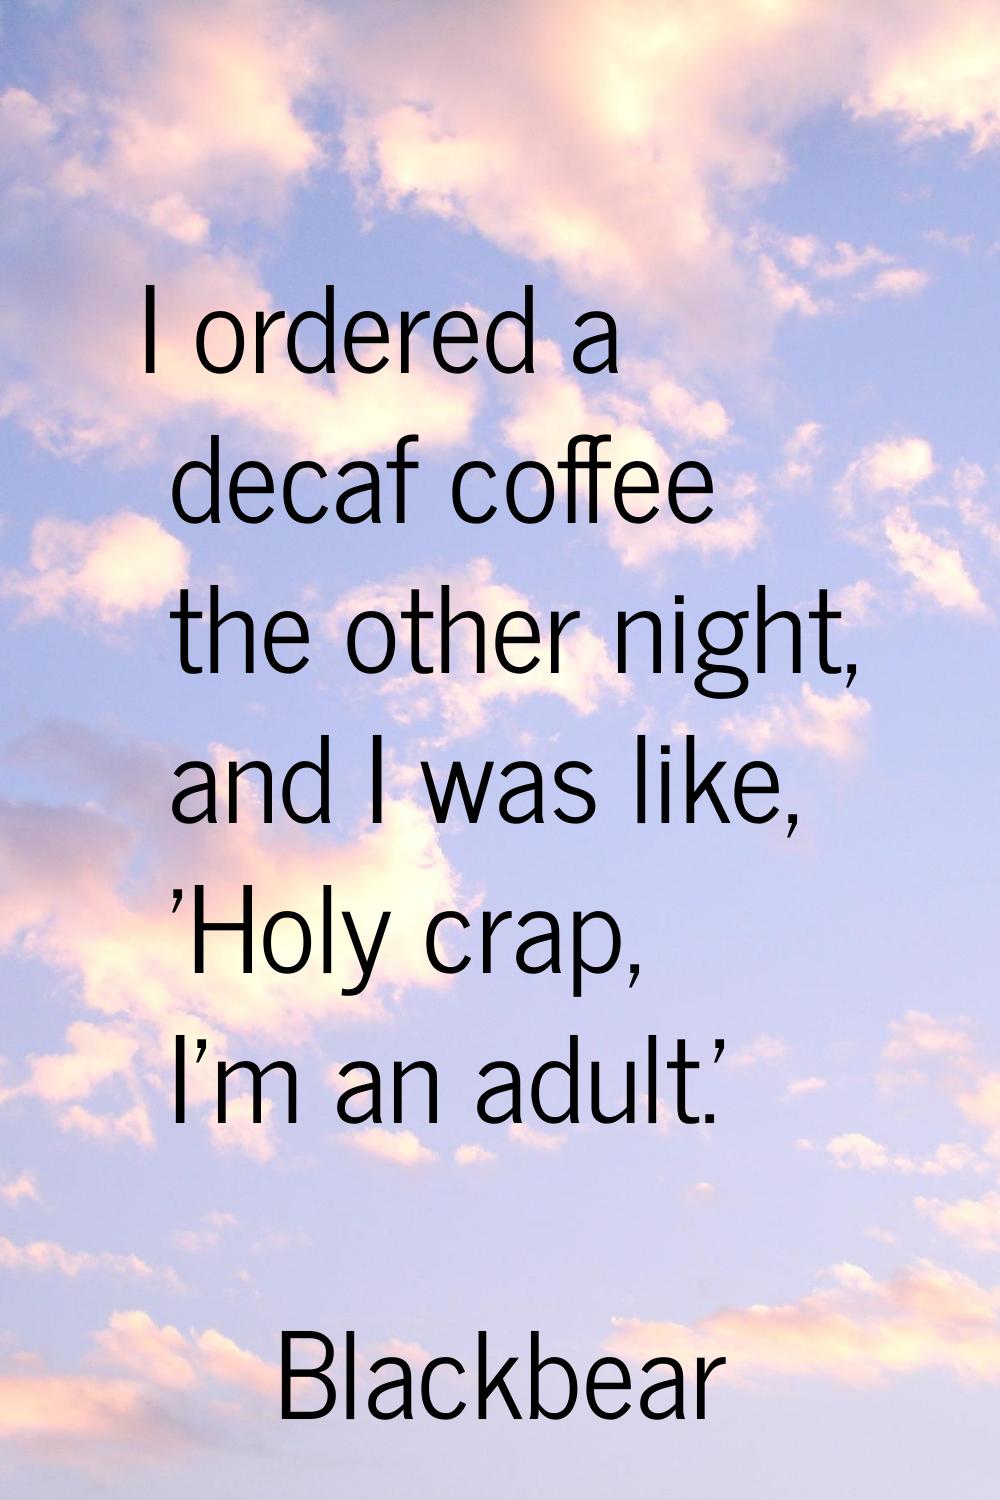 I ordered a decaf coffee the other night, and I was like, 'Holy crap, I'm an adult.'